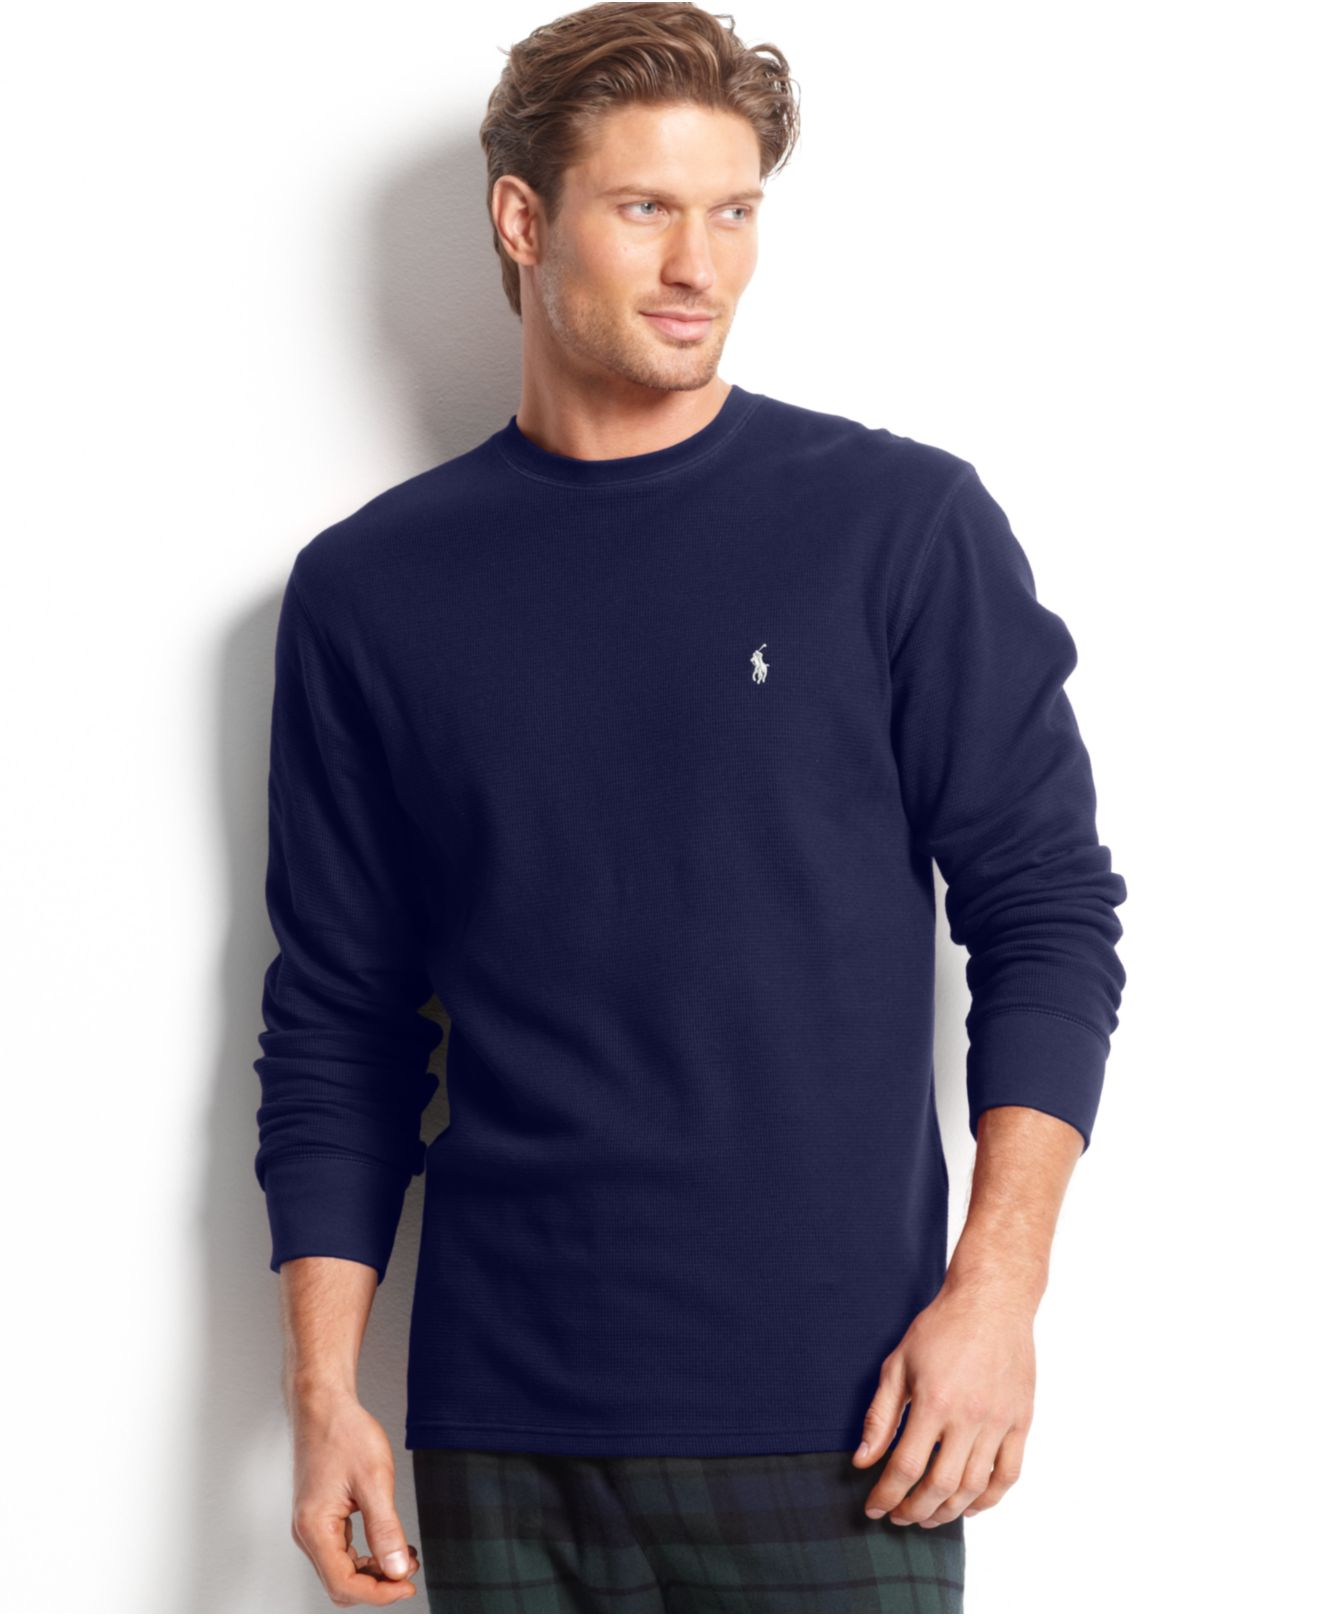 Lyst - Polo Ralph Lauren Big And Tall Long Sleeve Crew Neck Waffle ...